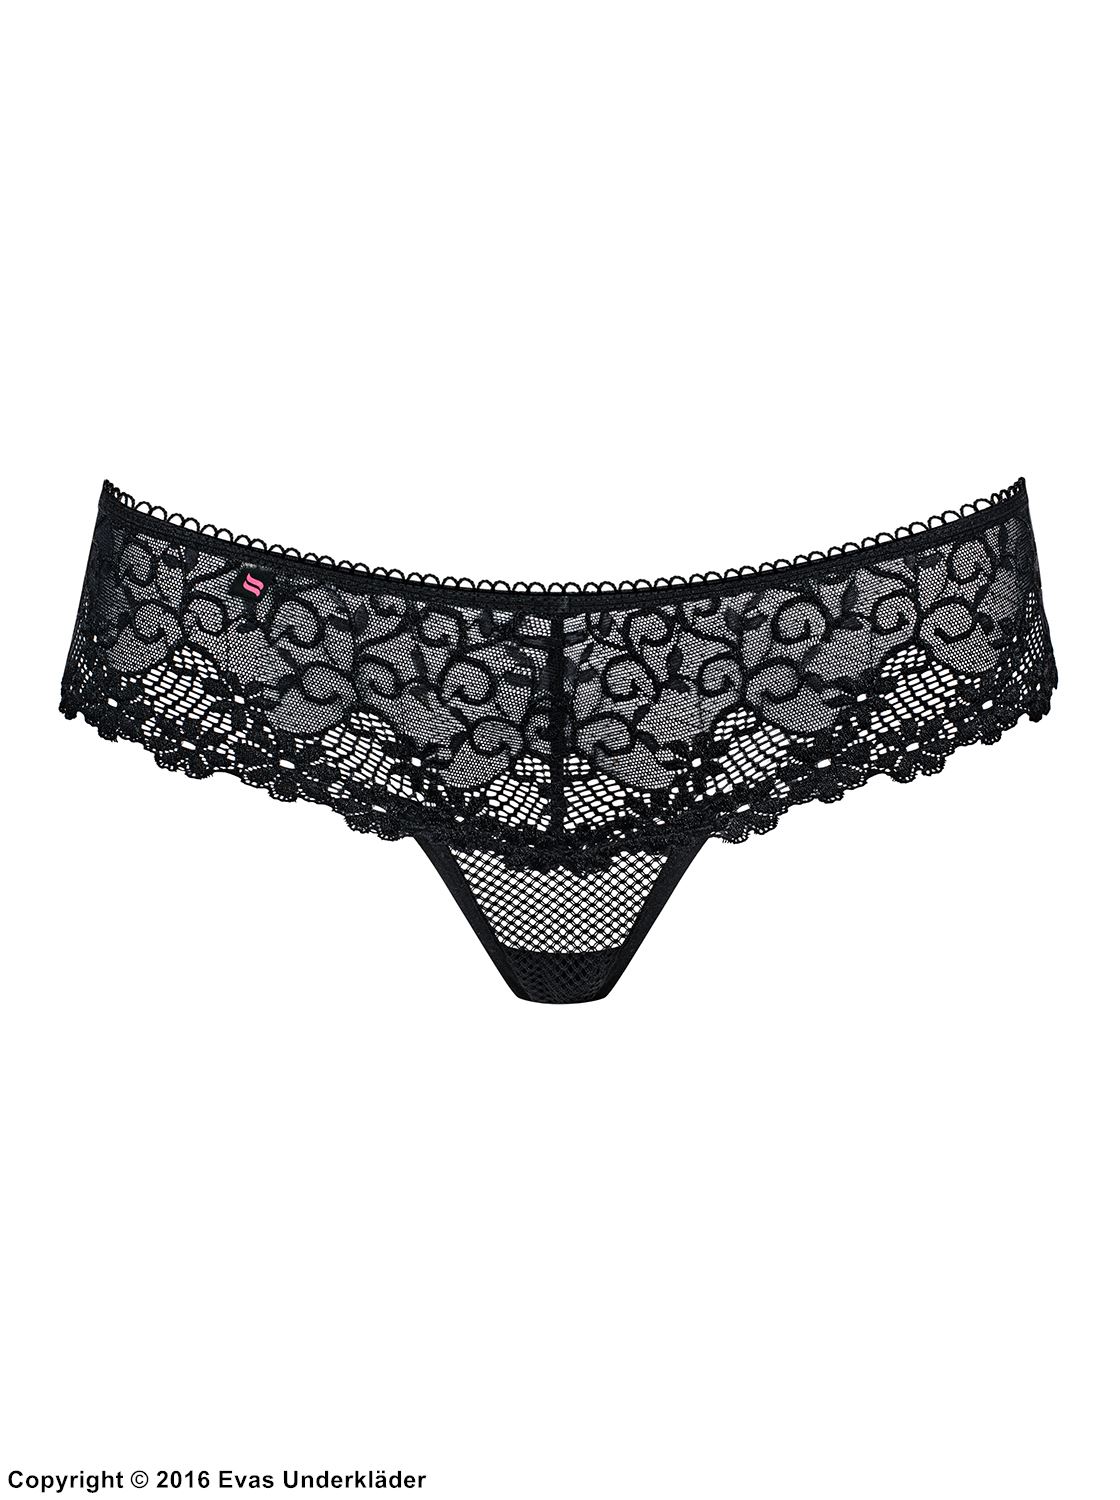 Romantic thong, small fishnet, floral lace